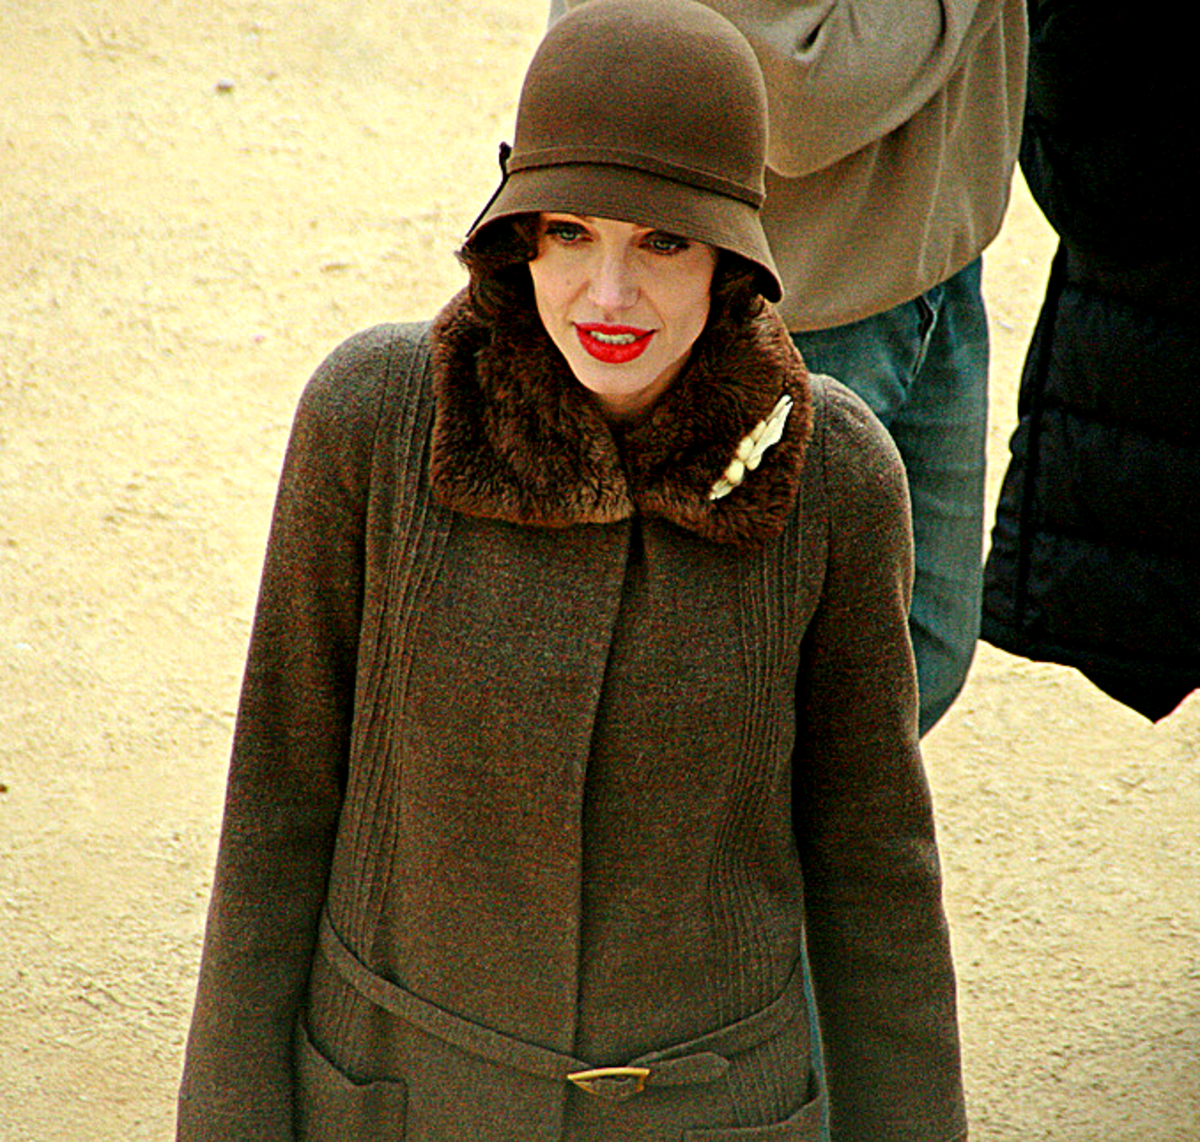 Angelina Jolie on the set of "The Changeling" (2008)